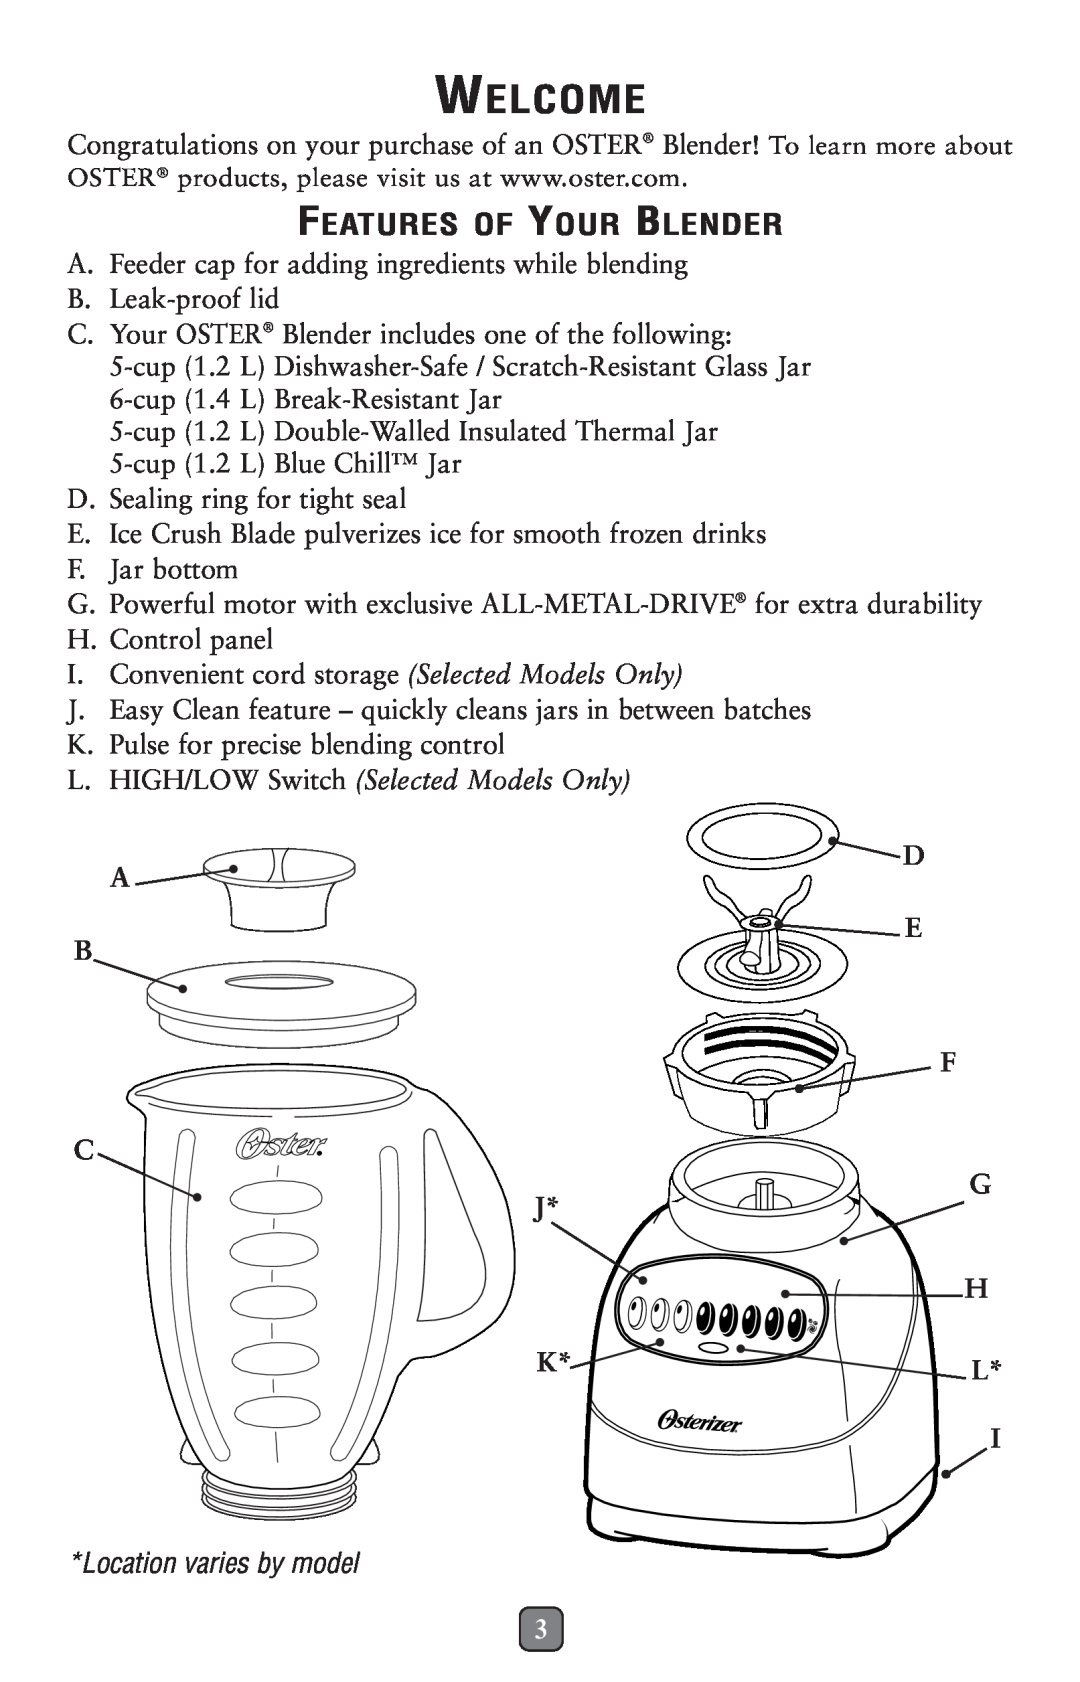 Oster 116530 Welcome, D A E B, Features Of Your Blender, L. HIGH/LOW Switch Selected Models Only, Location varies by model 